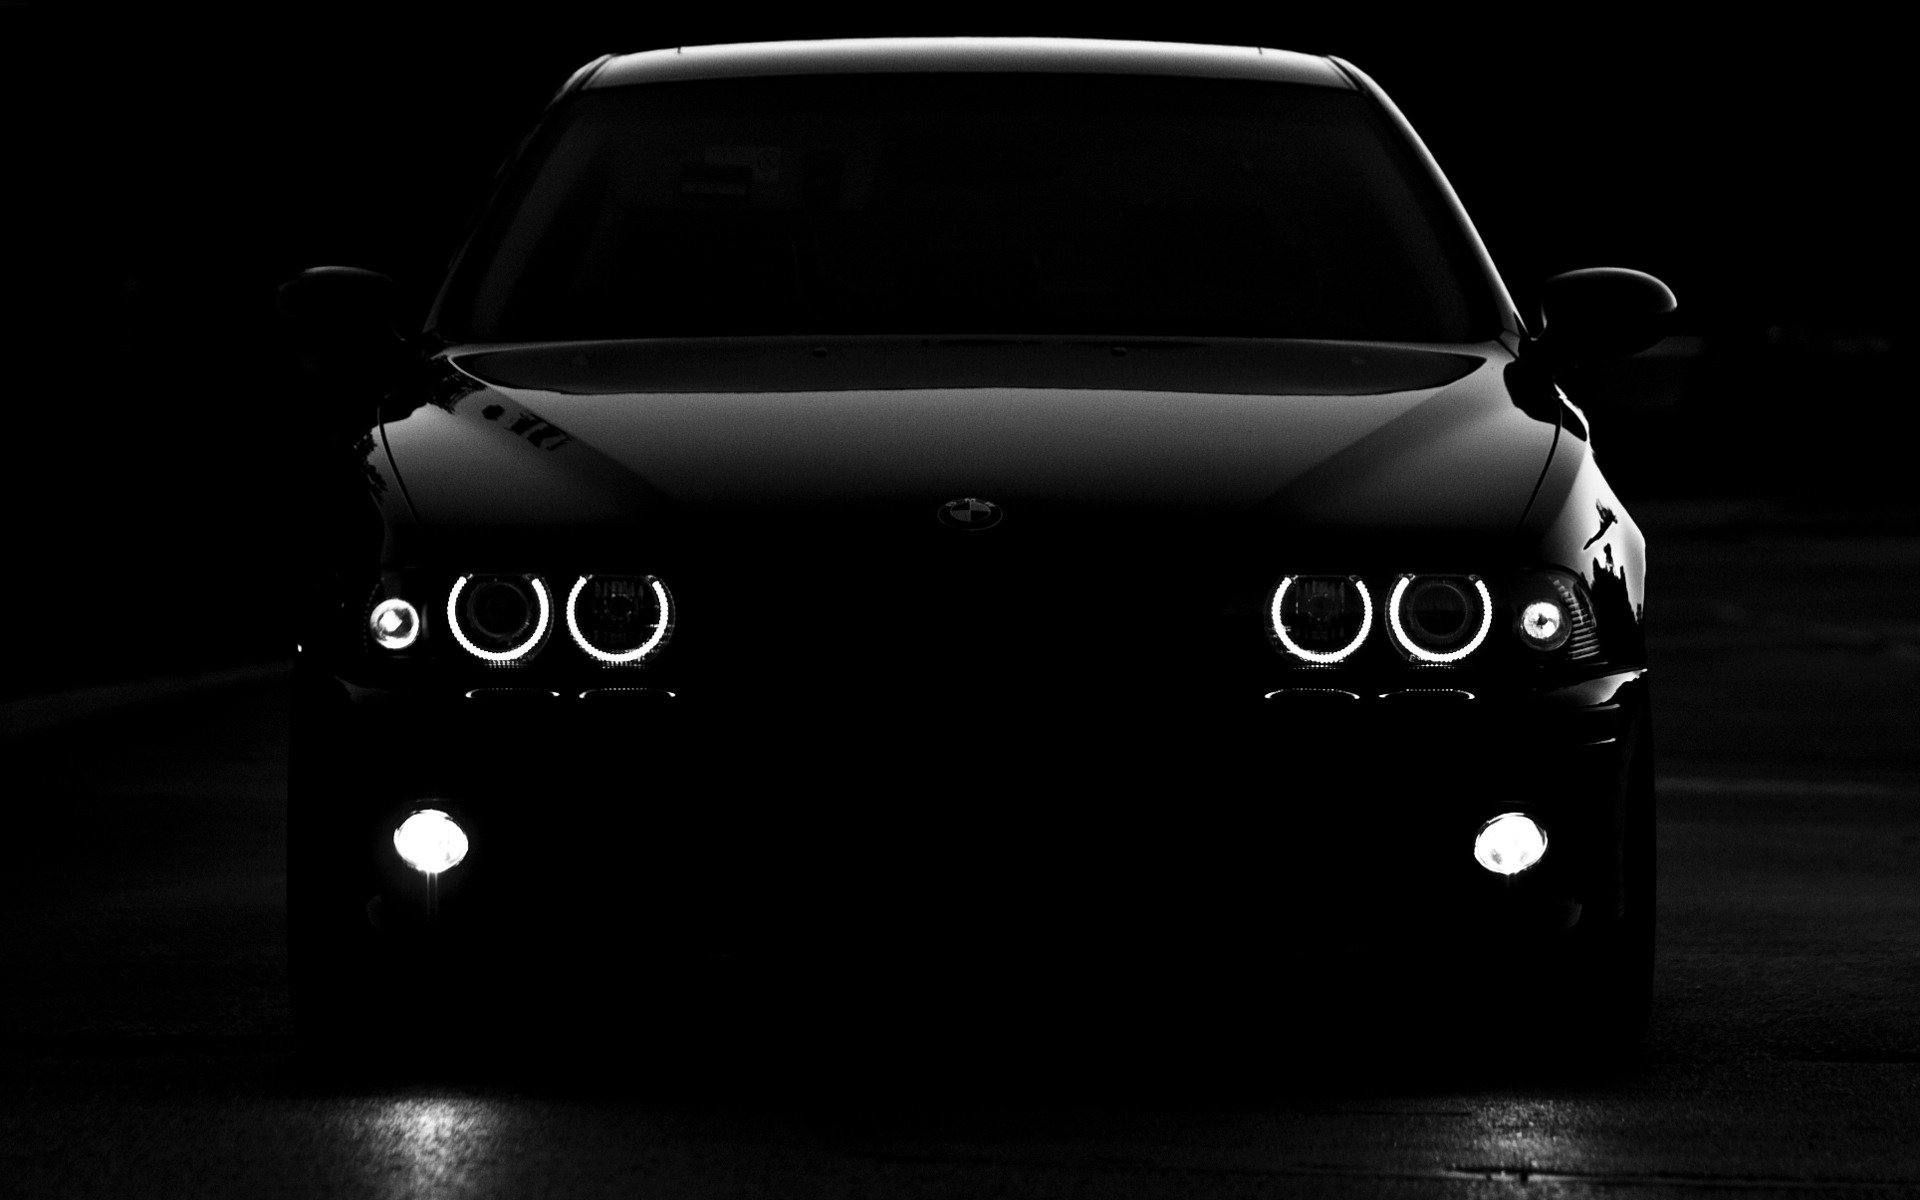 Bmw Wallpaper Black 6221 Hd Wallpapers in Cars   Imagescicom